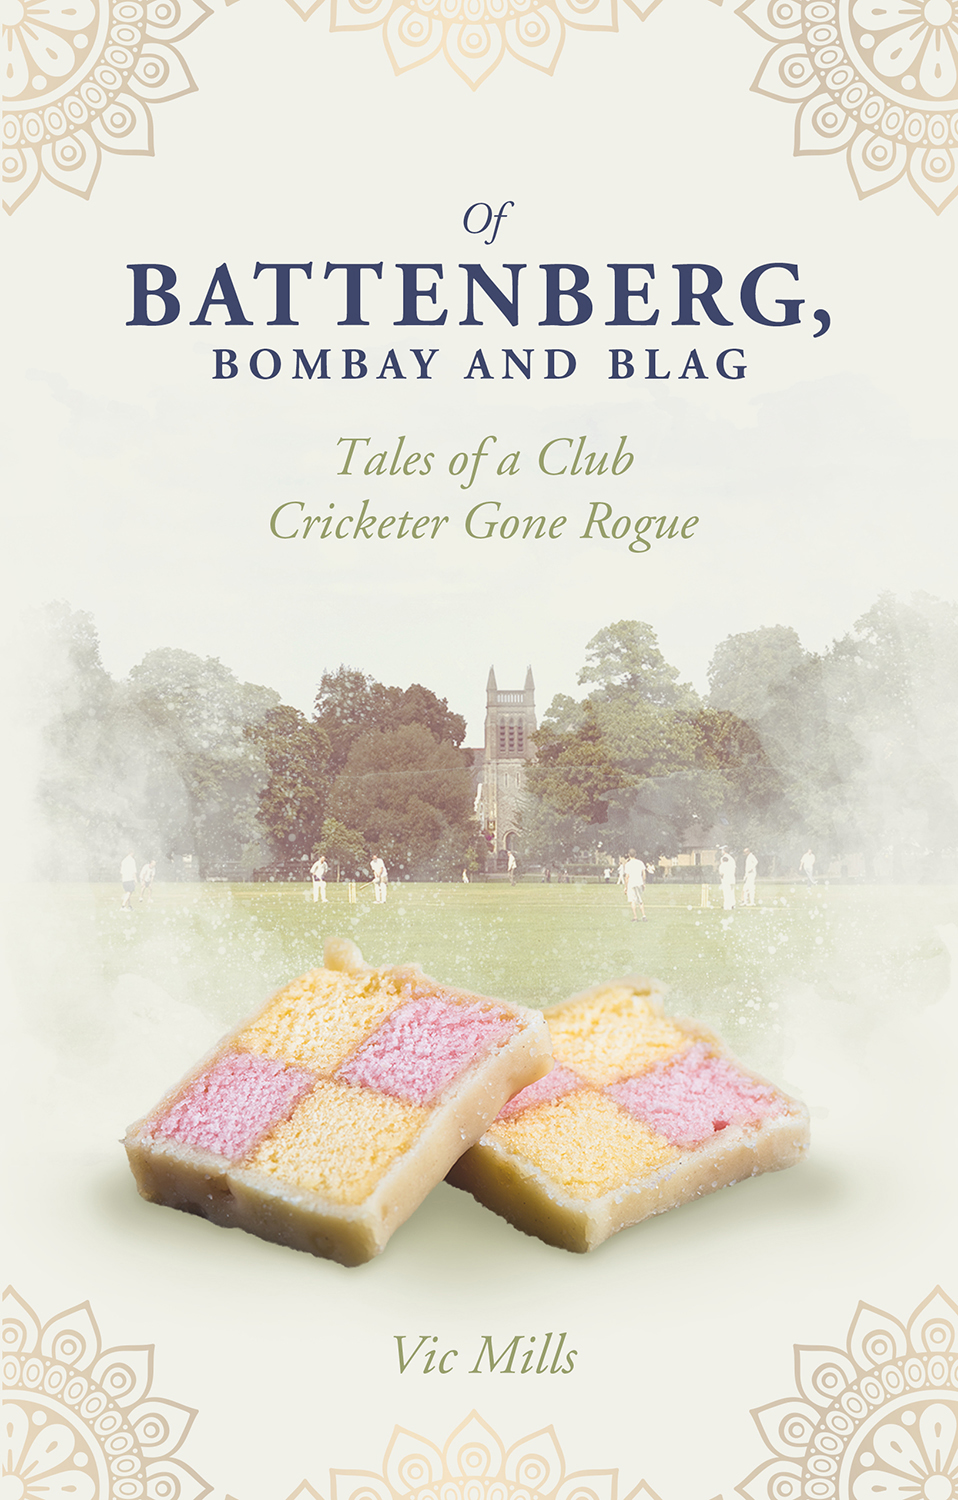 Of Battenberg, Bombay And Blag